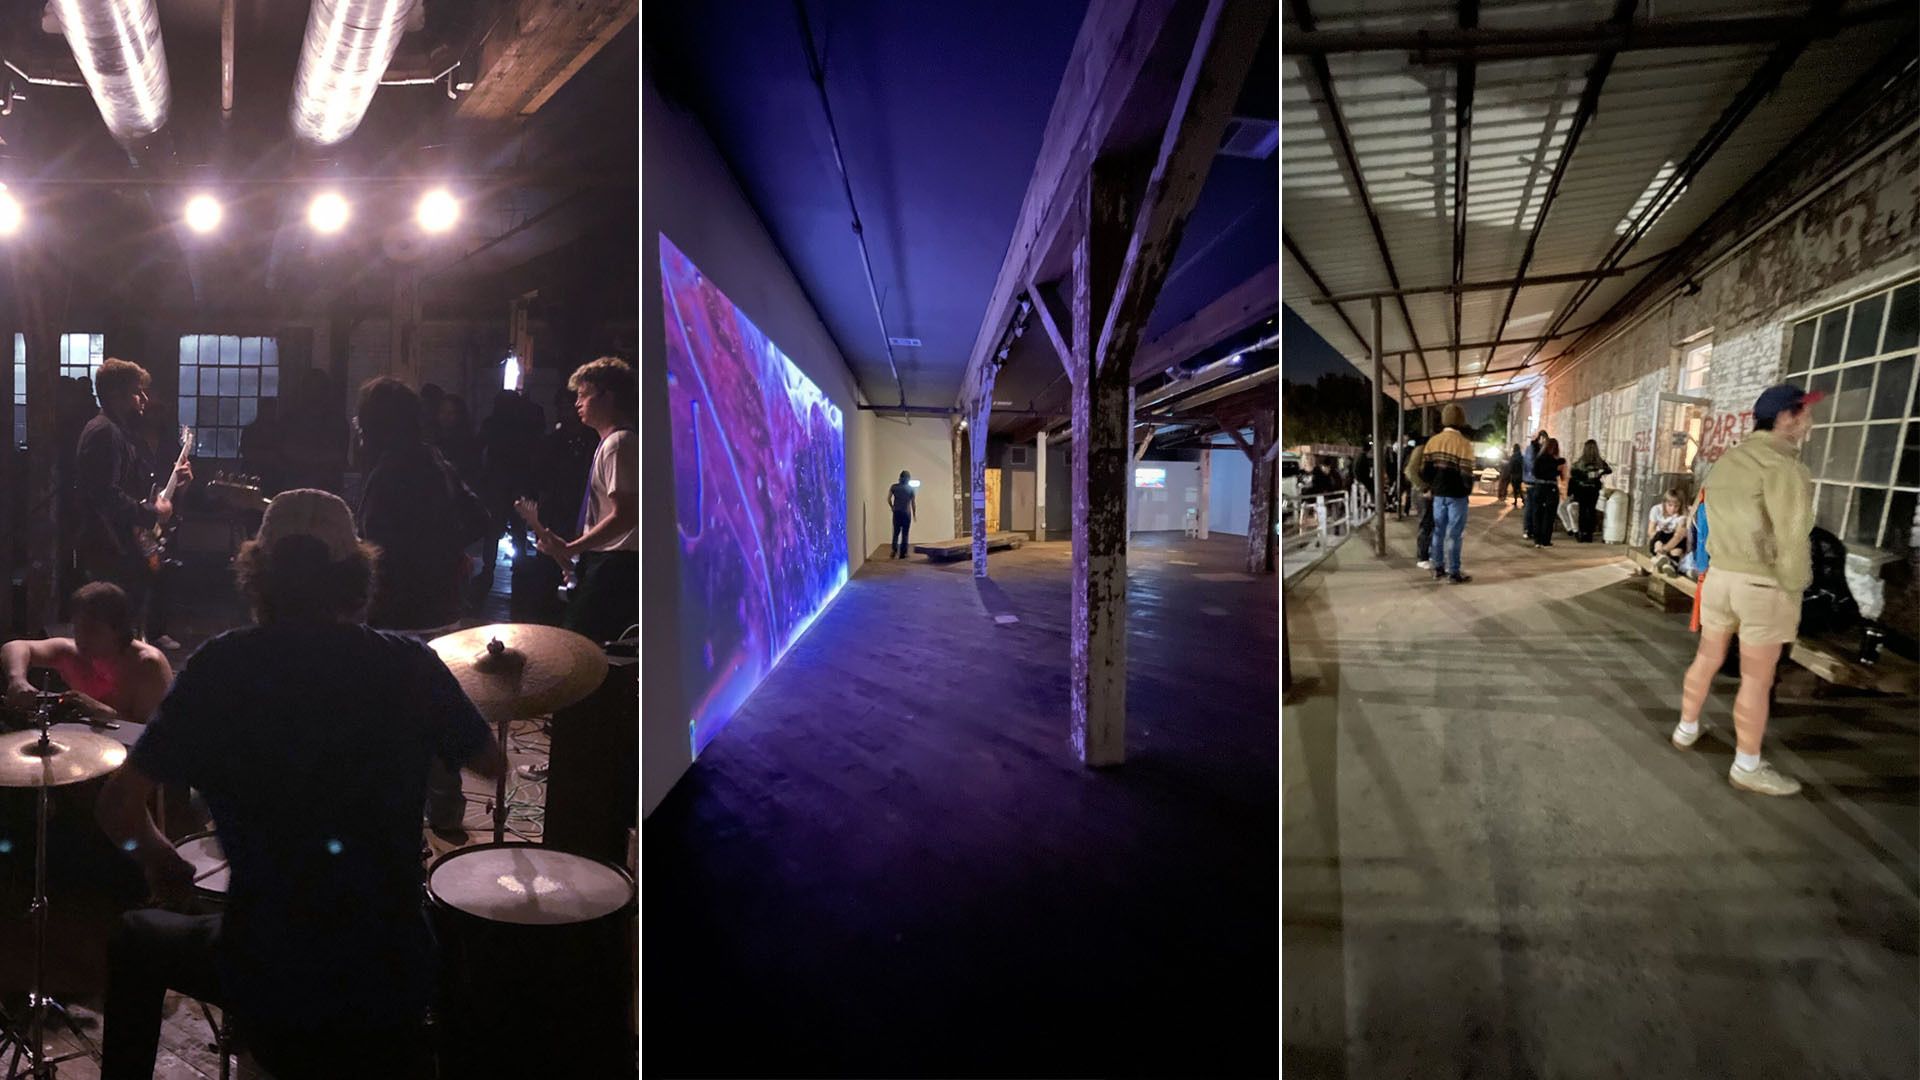 Three photos showing a band playing in a dark venue, a man in a gallery next to a large-scale video installation, and people mingling on a warehouse loading dock during an arts event 